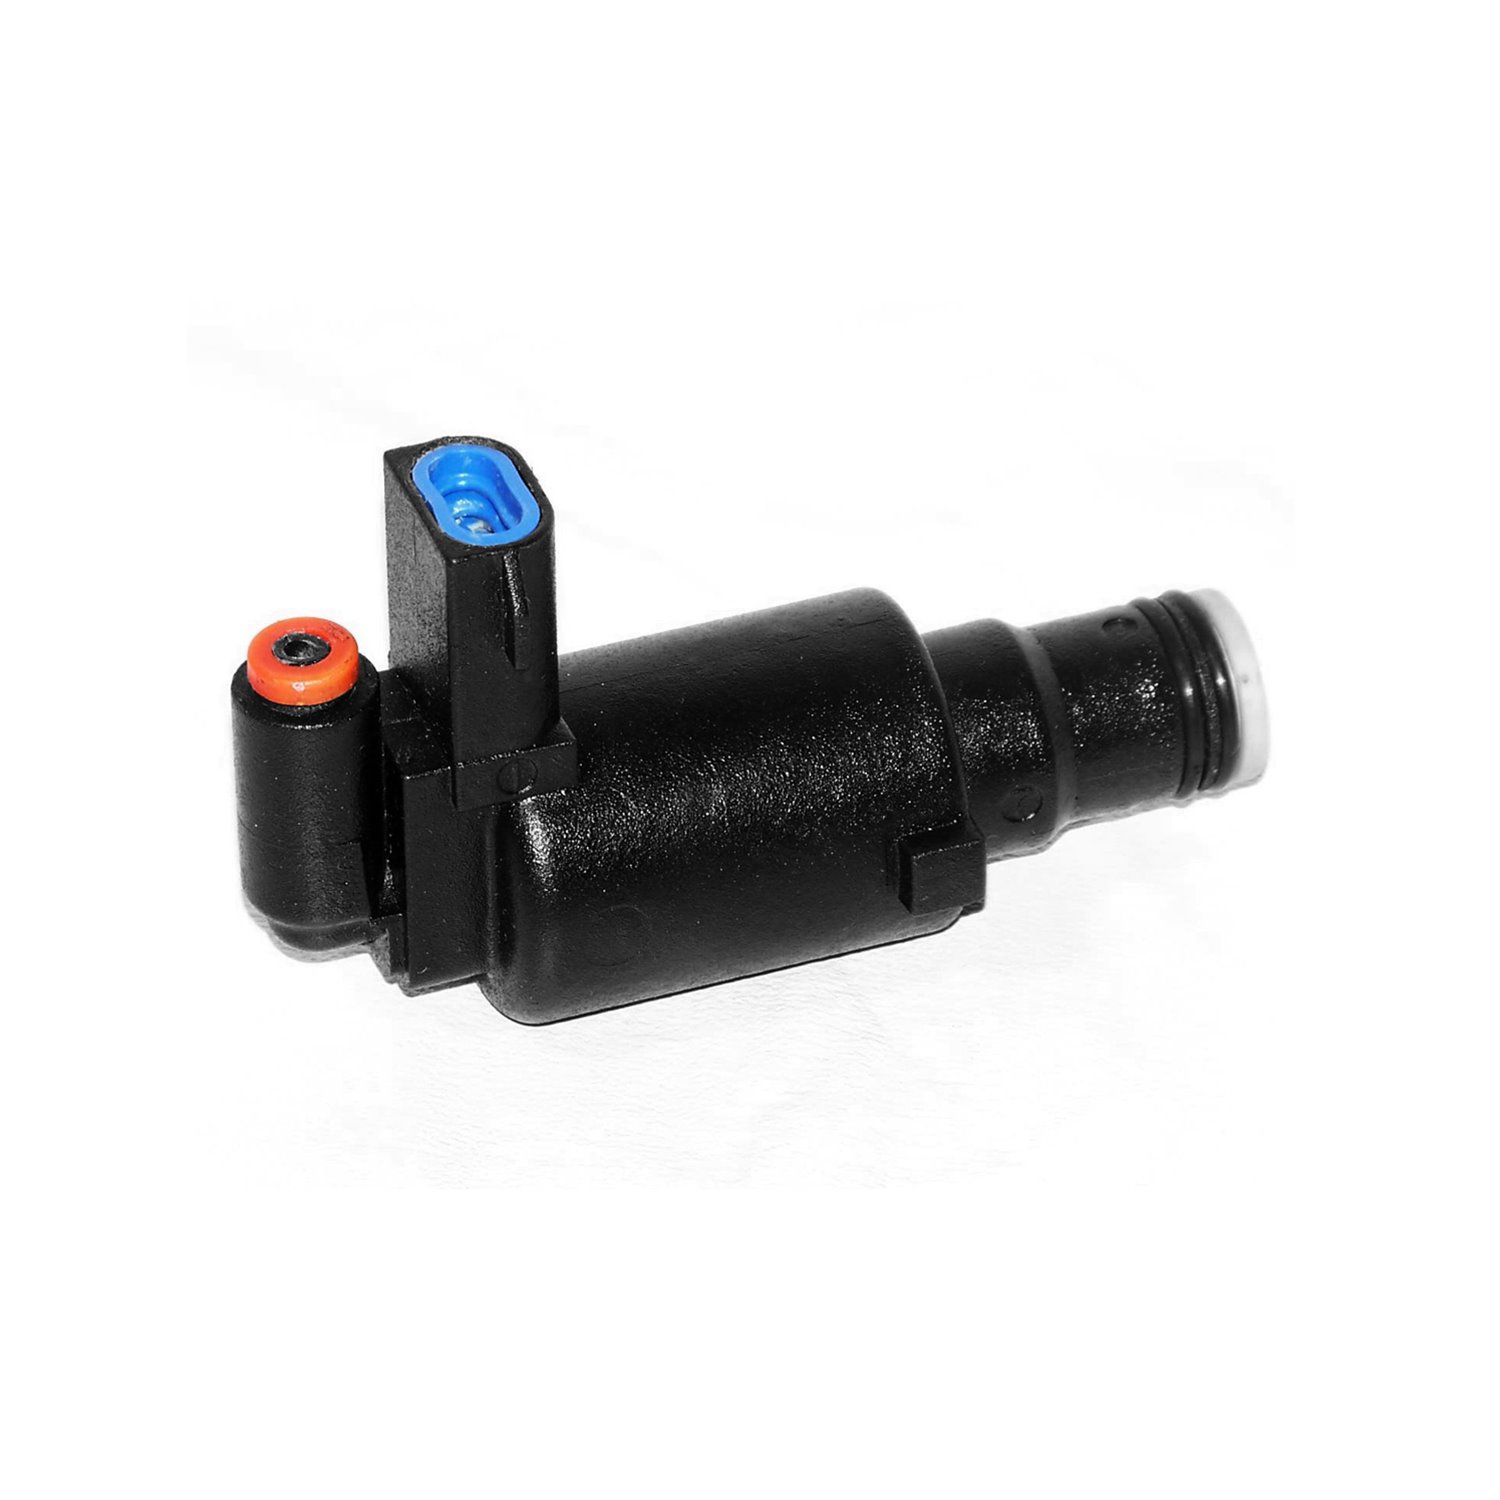 45-0F0000-3 Front Air Suspension Solenoid Valve Unit Fits Select Ford Expedition, Lincoln Continental, Lincoln Navigator